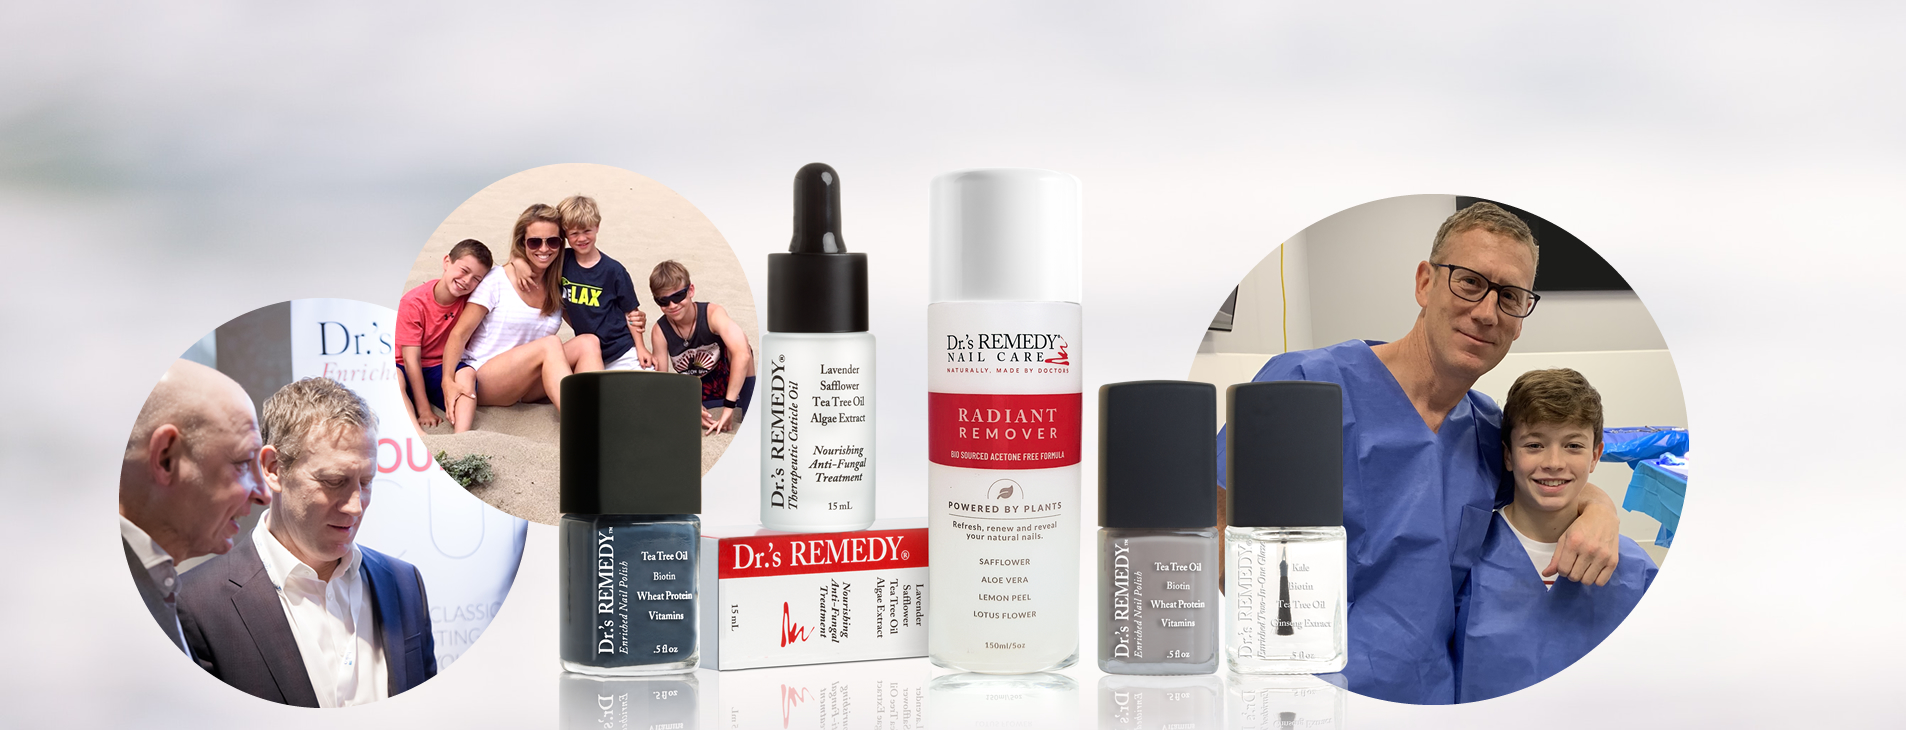 The story of Dr.'s REMEDY, nail polish developed by two board-certified podiatrists